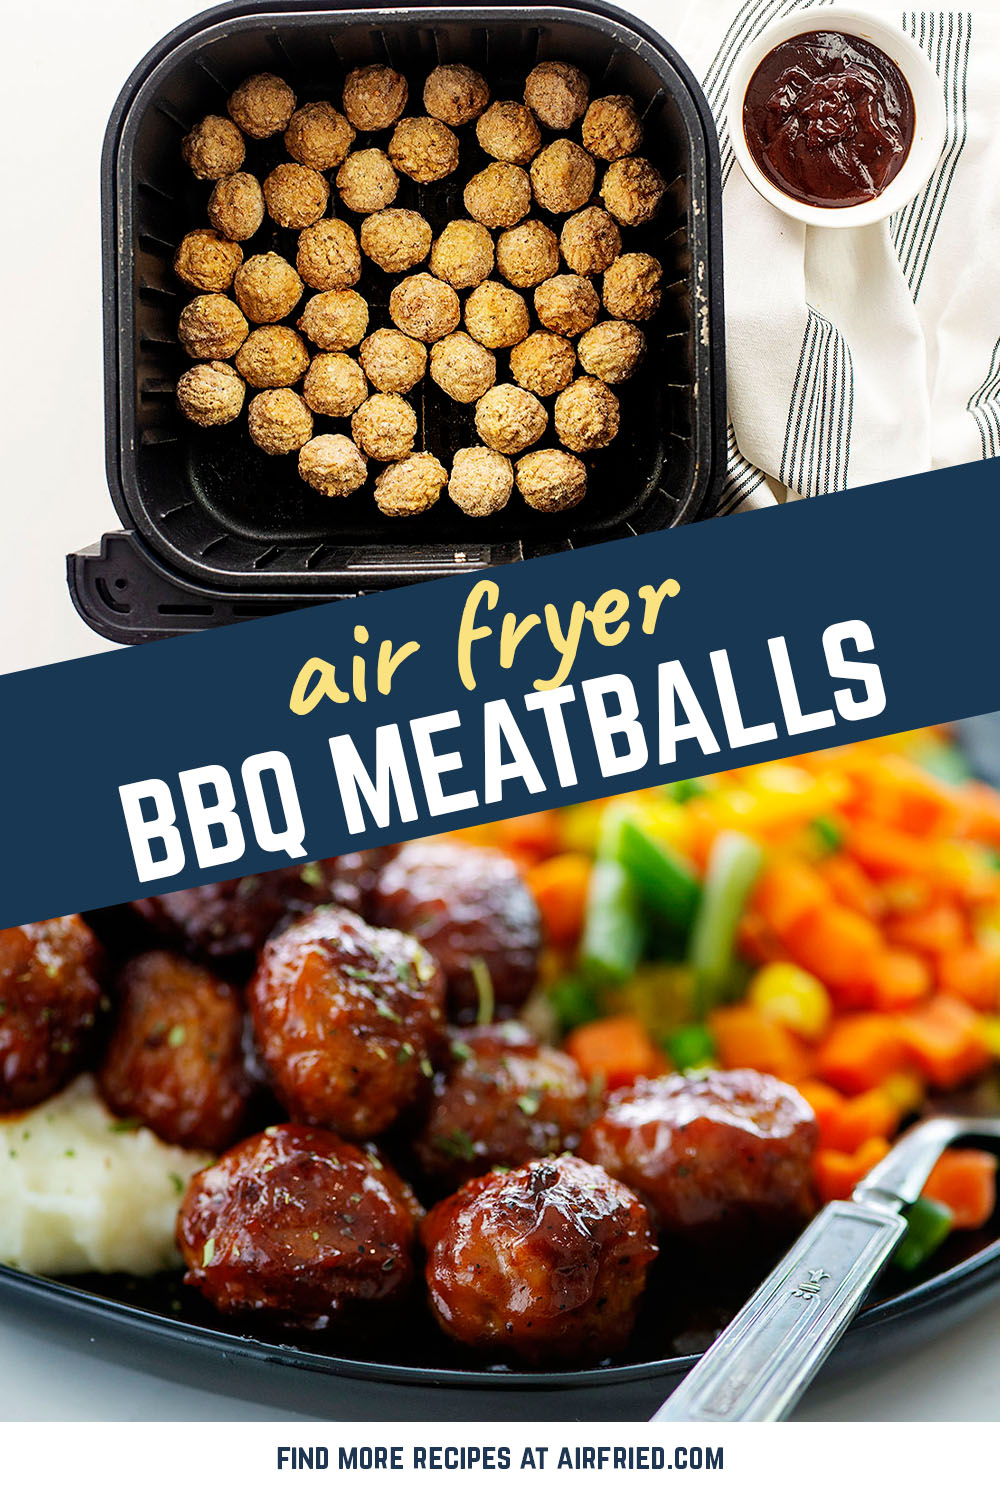 We make Air Fryer Frozen Meatballs into a 10 minute dinner! Dump the meatballs in the air fryer, cook for 10 minutes, and toss in BBQ sauce for a simple dinner! Serve with mashed potatoes and veggies and you've got a quick, family friendly meal, that took practically no effort! 